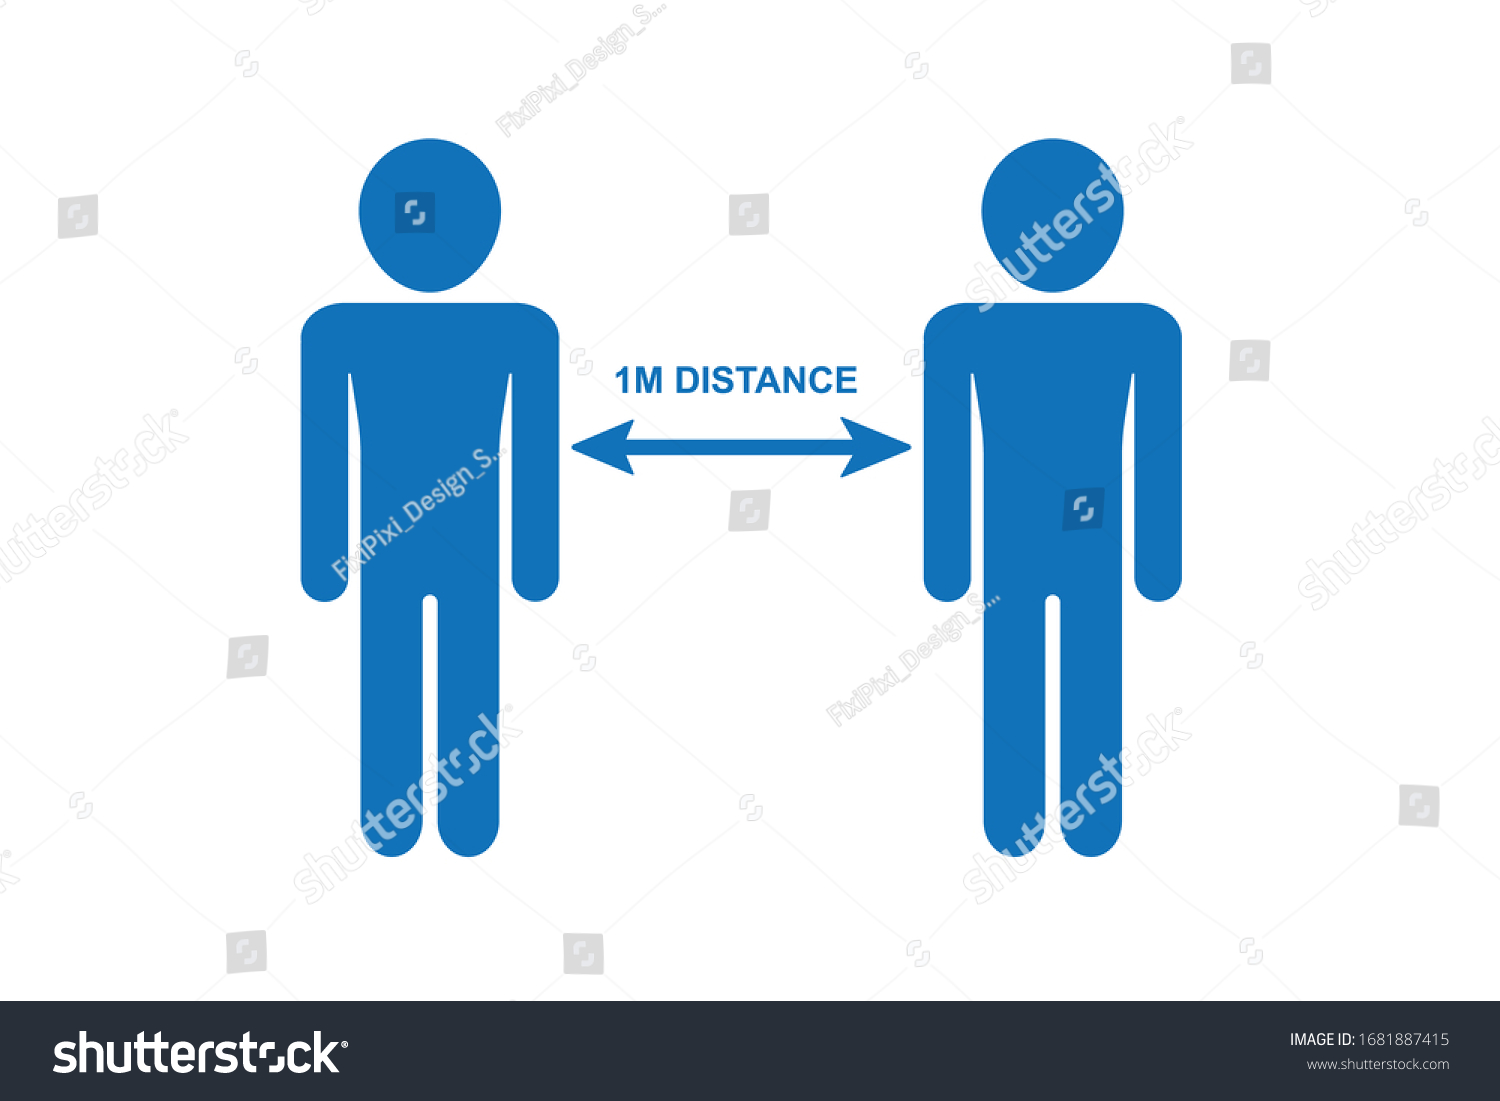 Social distance icon, 1 meter distance due to corona virus,Keep distance sign. Coronovirus epidemic protective equipment. Preventive measures. Steps to protect yourself blue version #1681887415